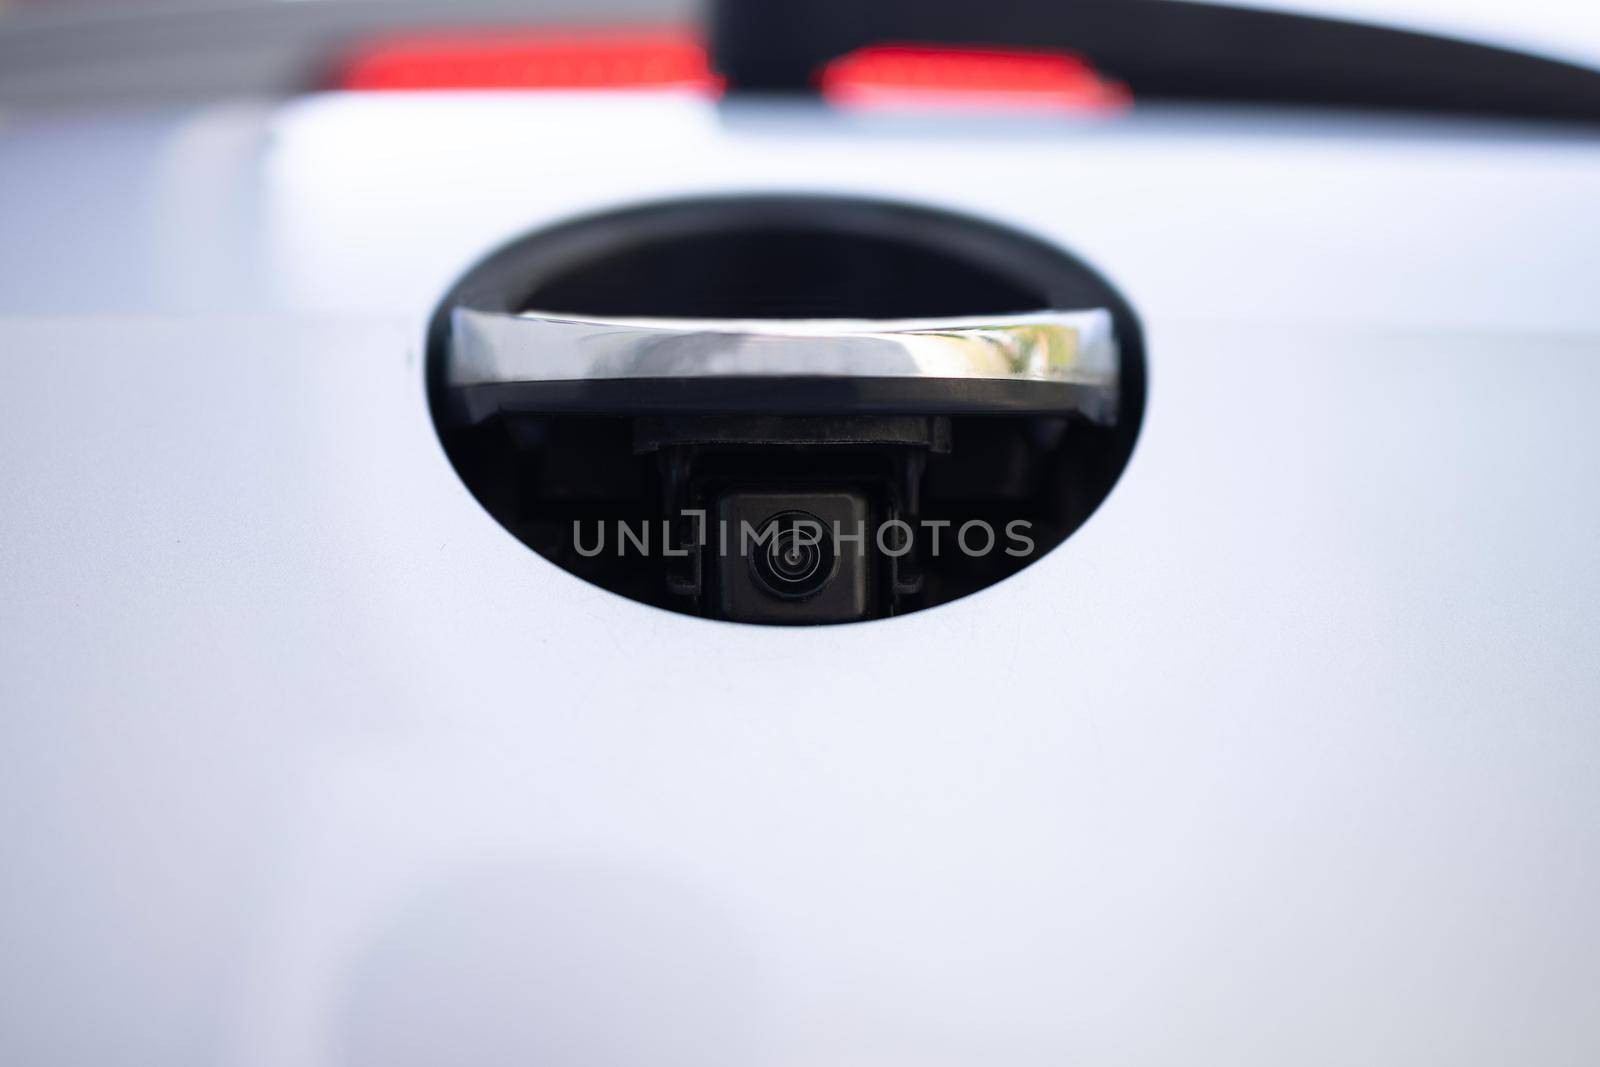 Rear view camera. Luxury back car rear view camera for parking assistance. Concept of safety car driving while parking process. Assist device equipment in modern electric cars. by uflypro